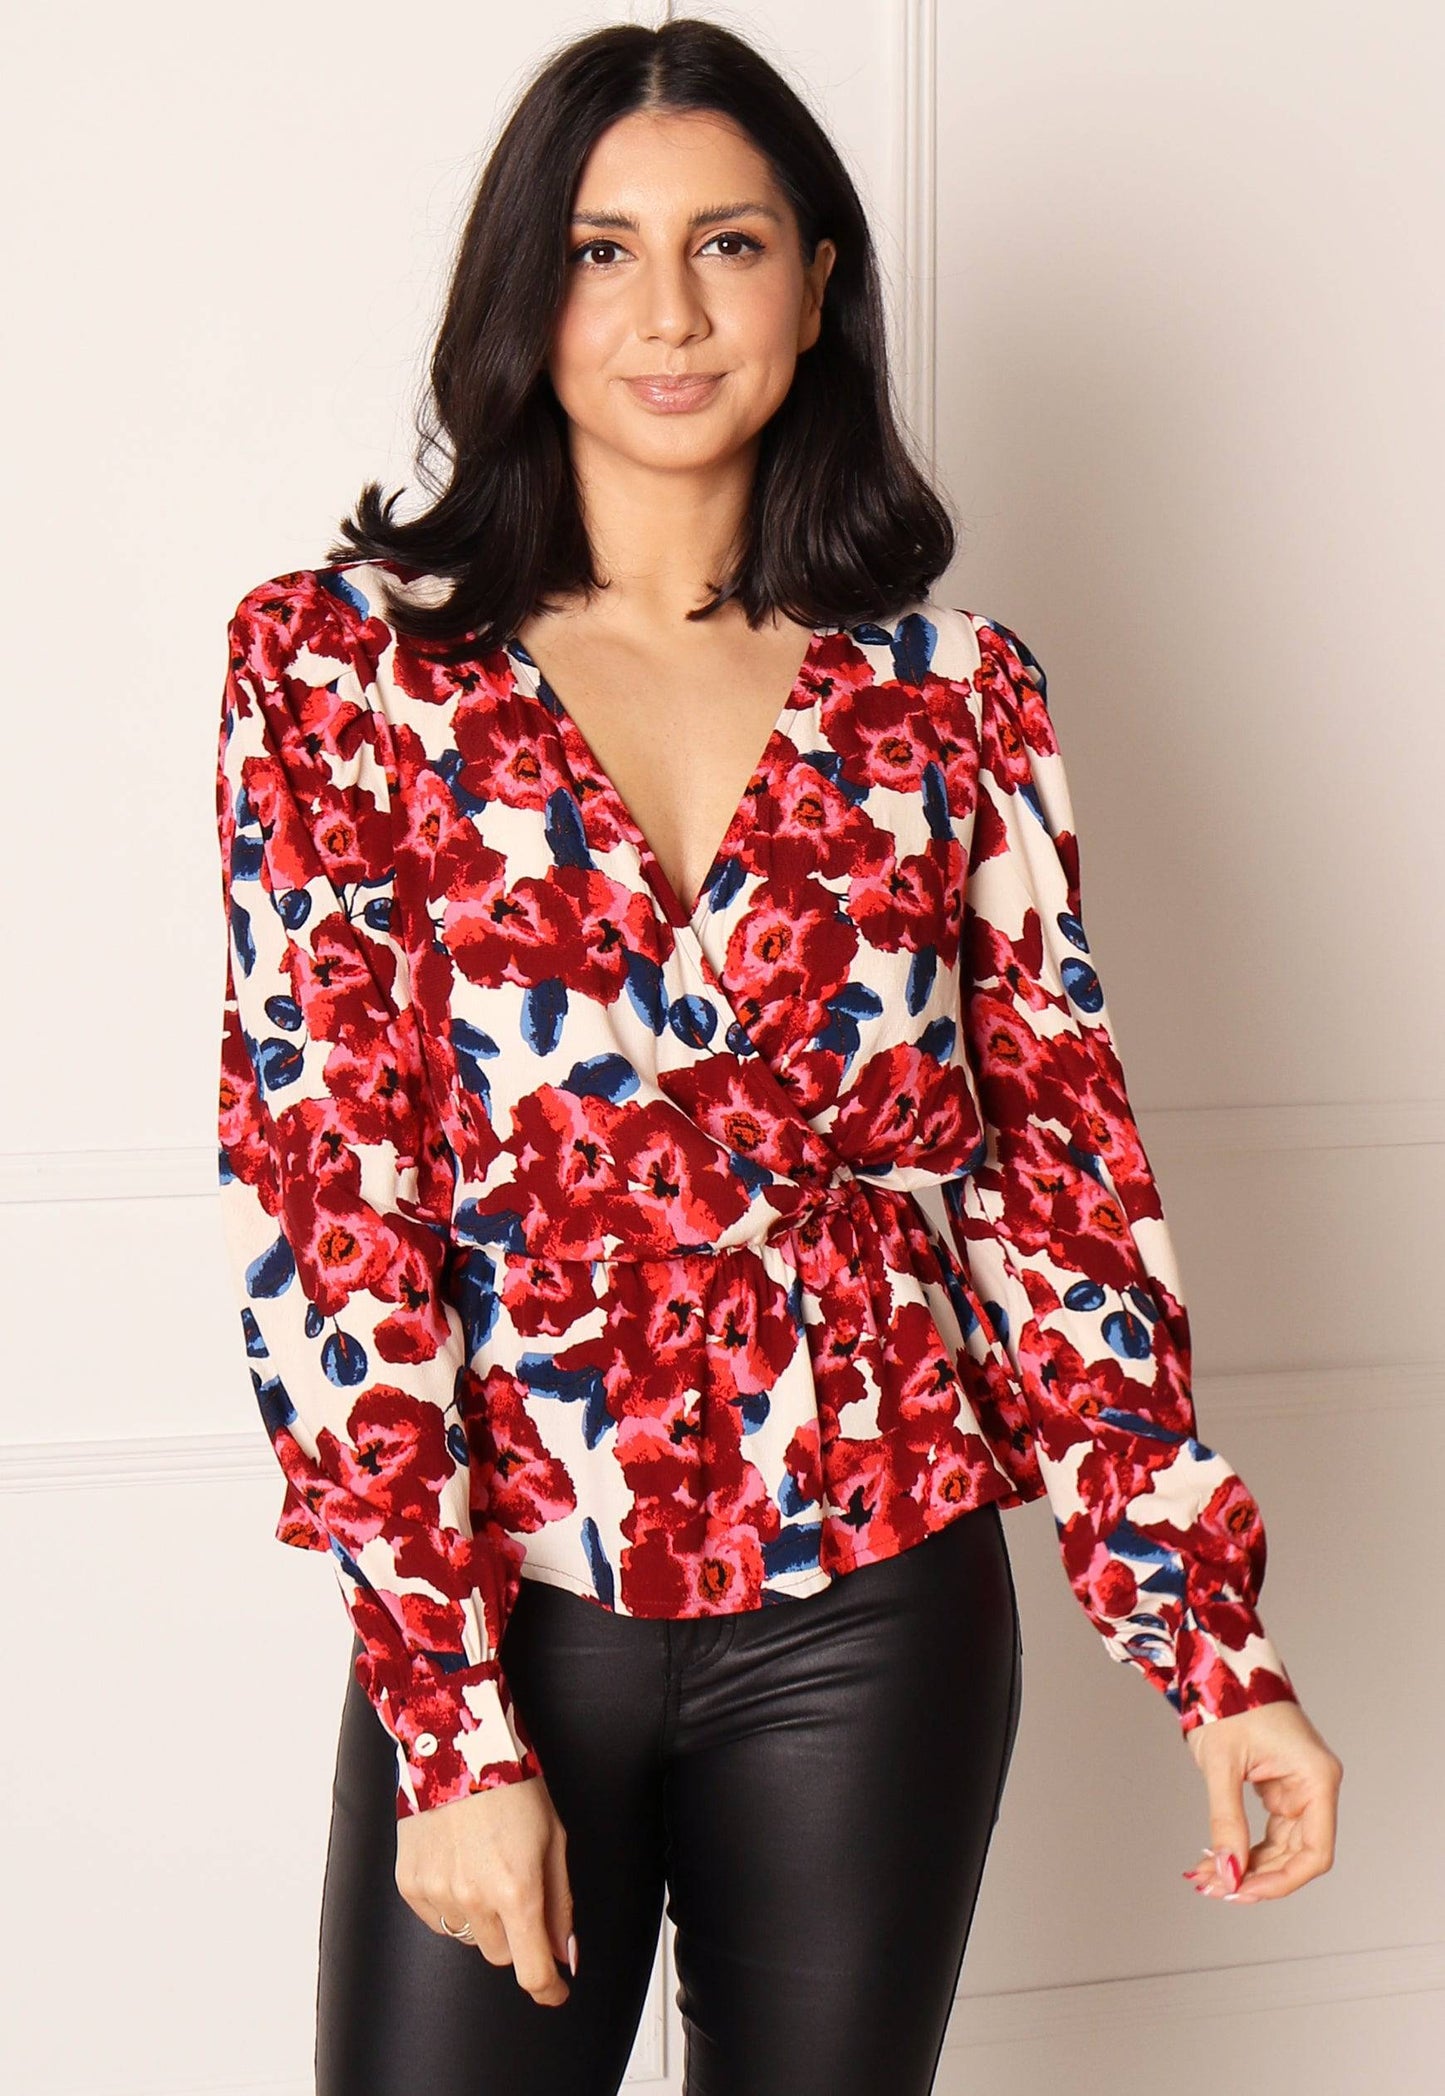 ONLY True Floral Print Wrap Top with Long Sleeves in Red & Pink - One Nation Clothing